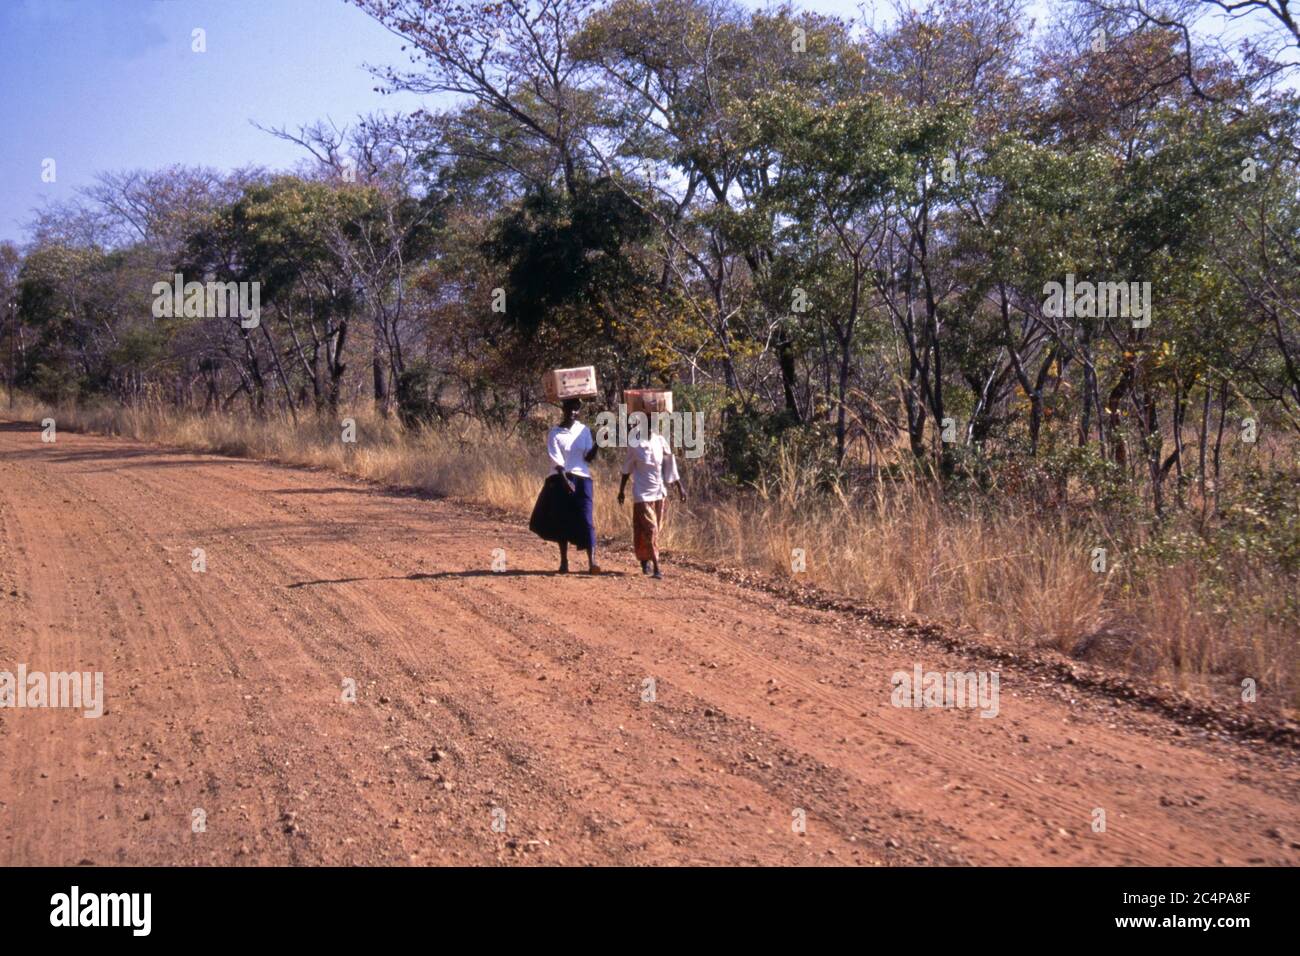 Two young women walking along dirt road carrying loads on their heads, Hwange National Park, Zimbabwe Stock Photo